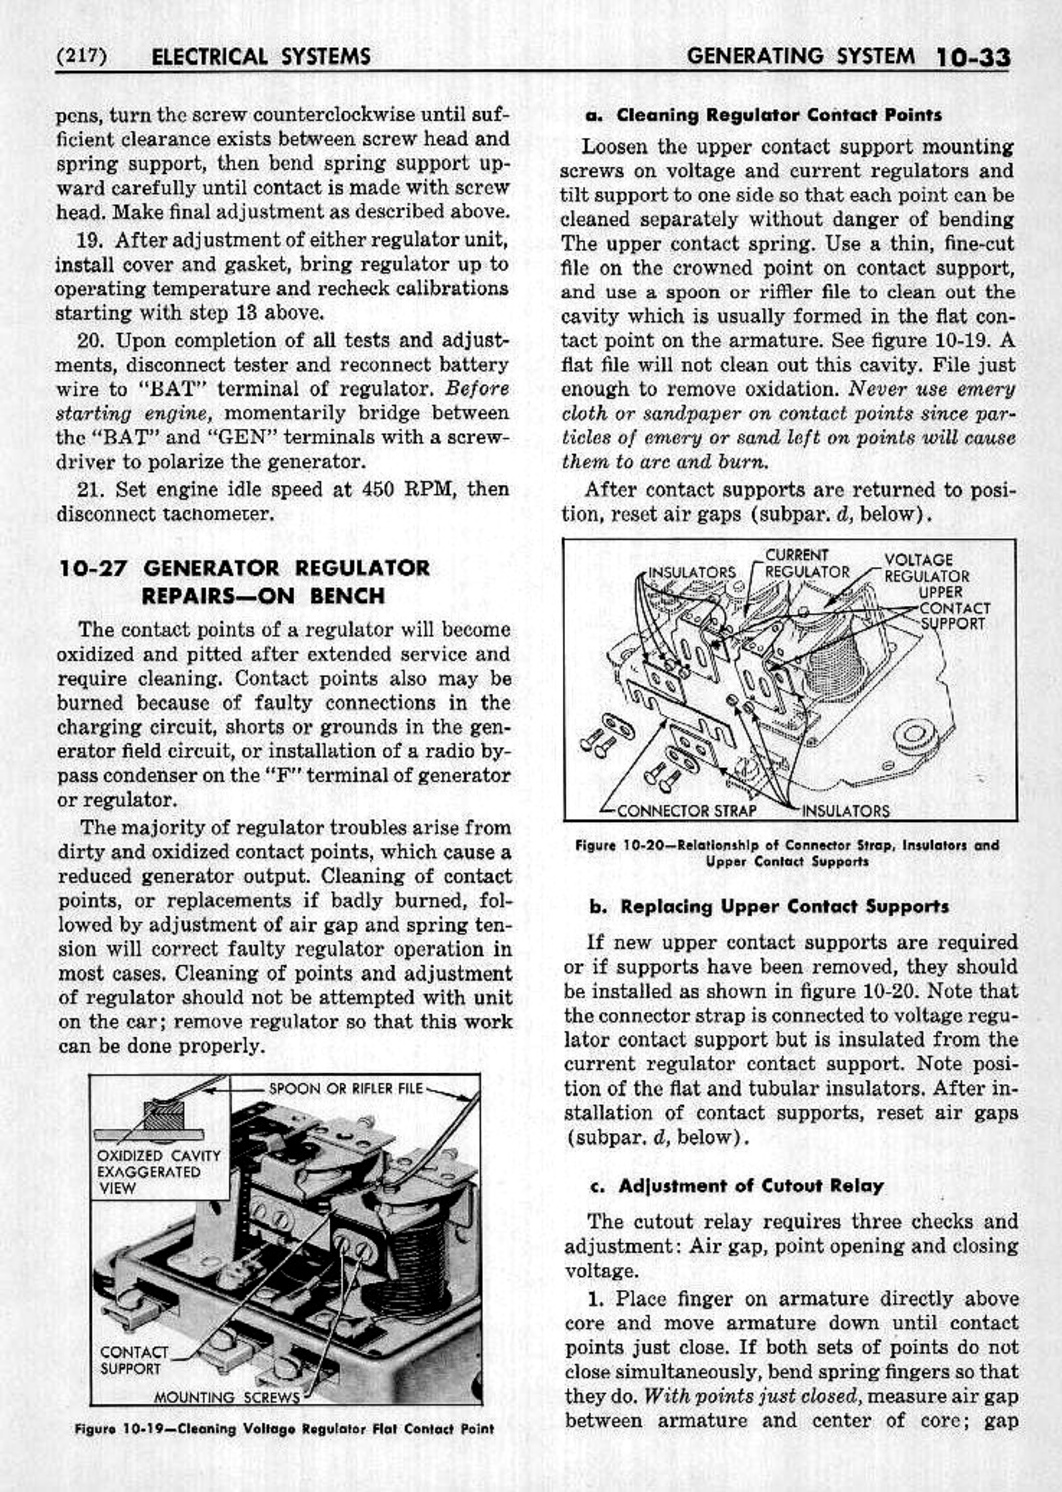 n_11 1953 Buick Shop Manual - Electrical Systems-033-033.jpg